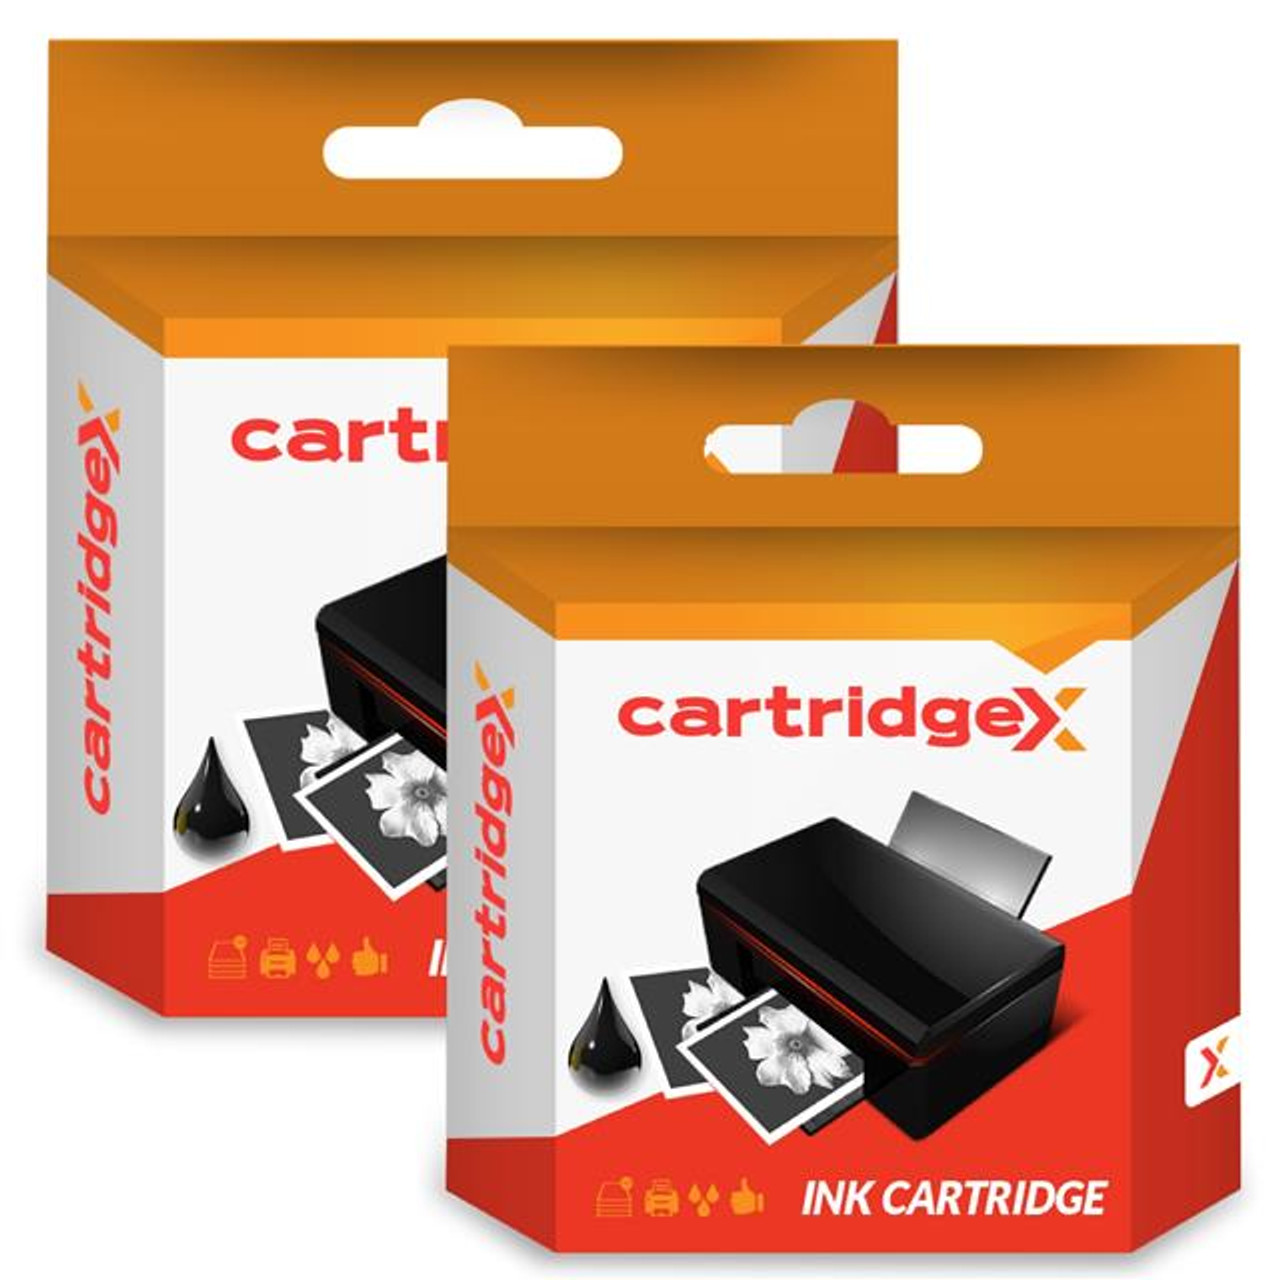 Compatible 2 X Black Ink Cartridge For Brother Dcp-145c Dcp-163c Dcp-165c Lc980